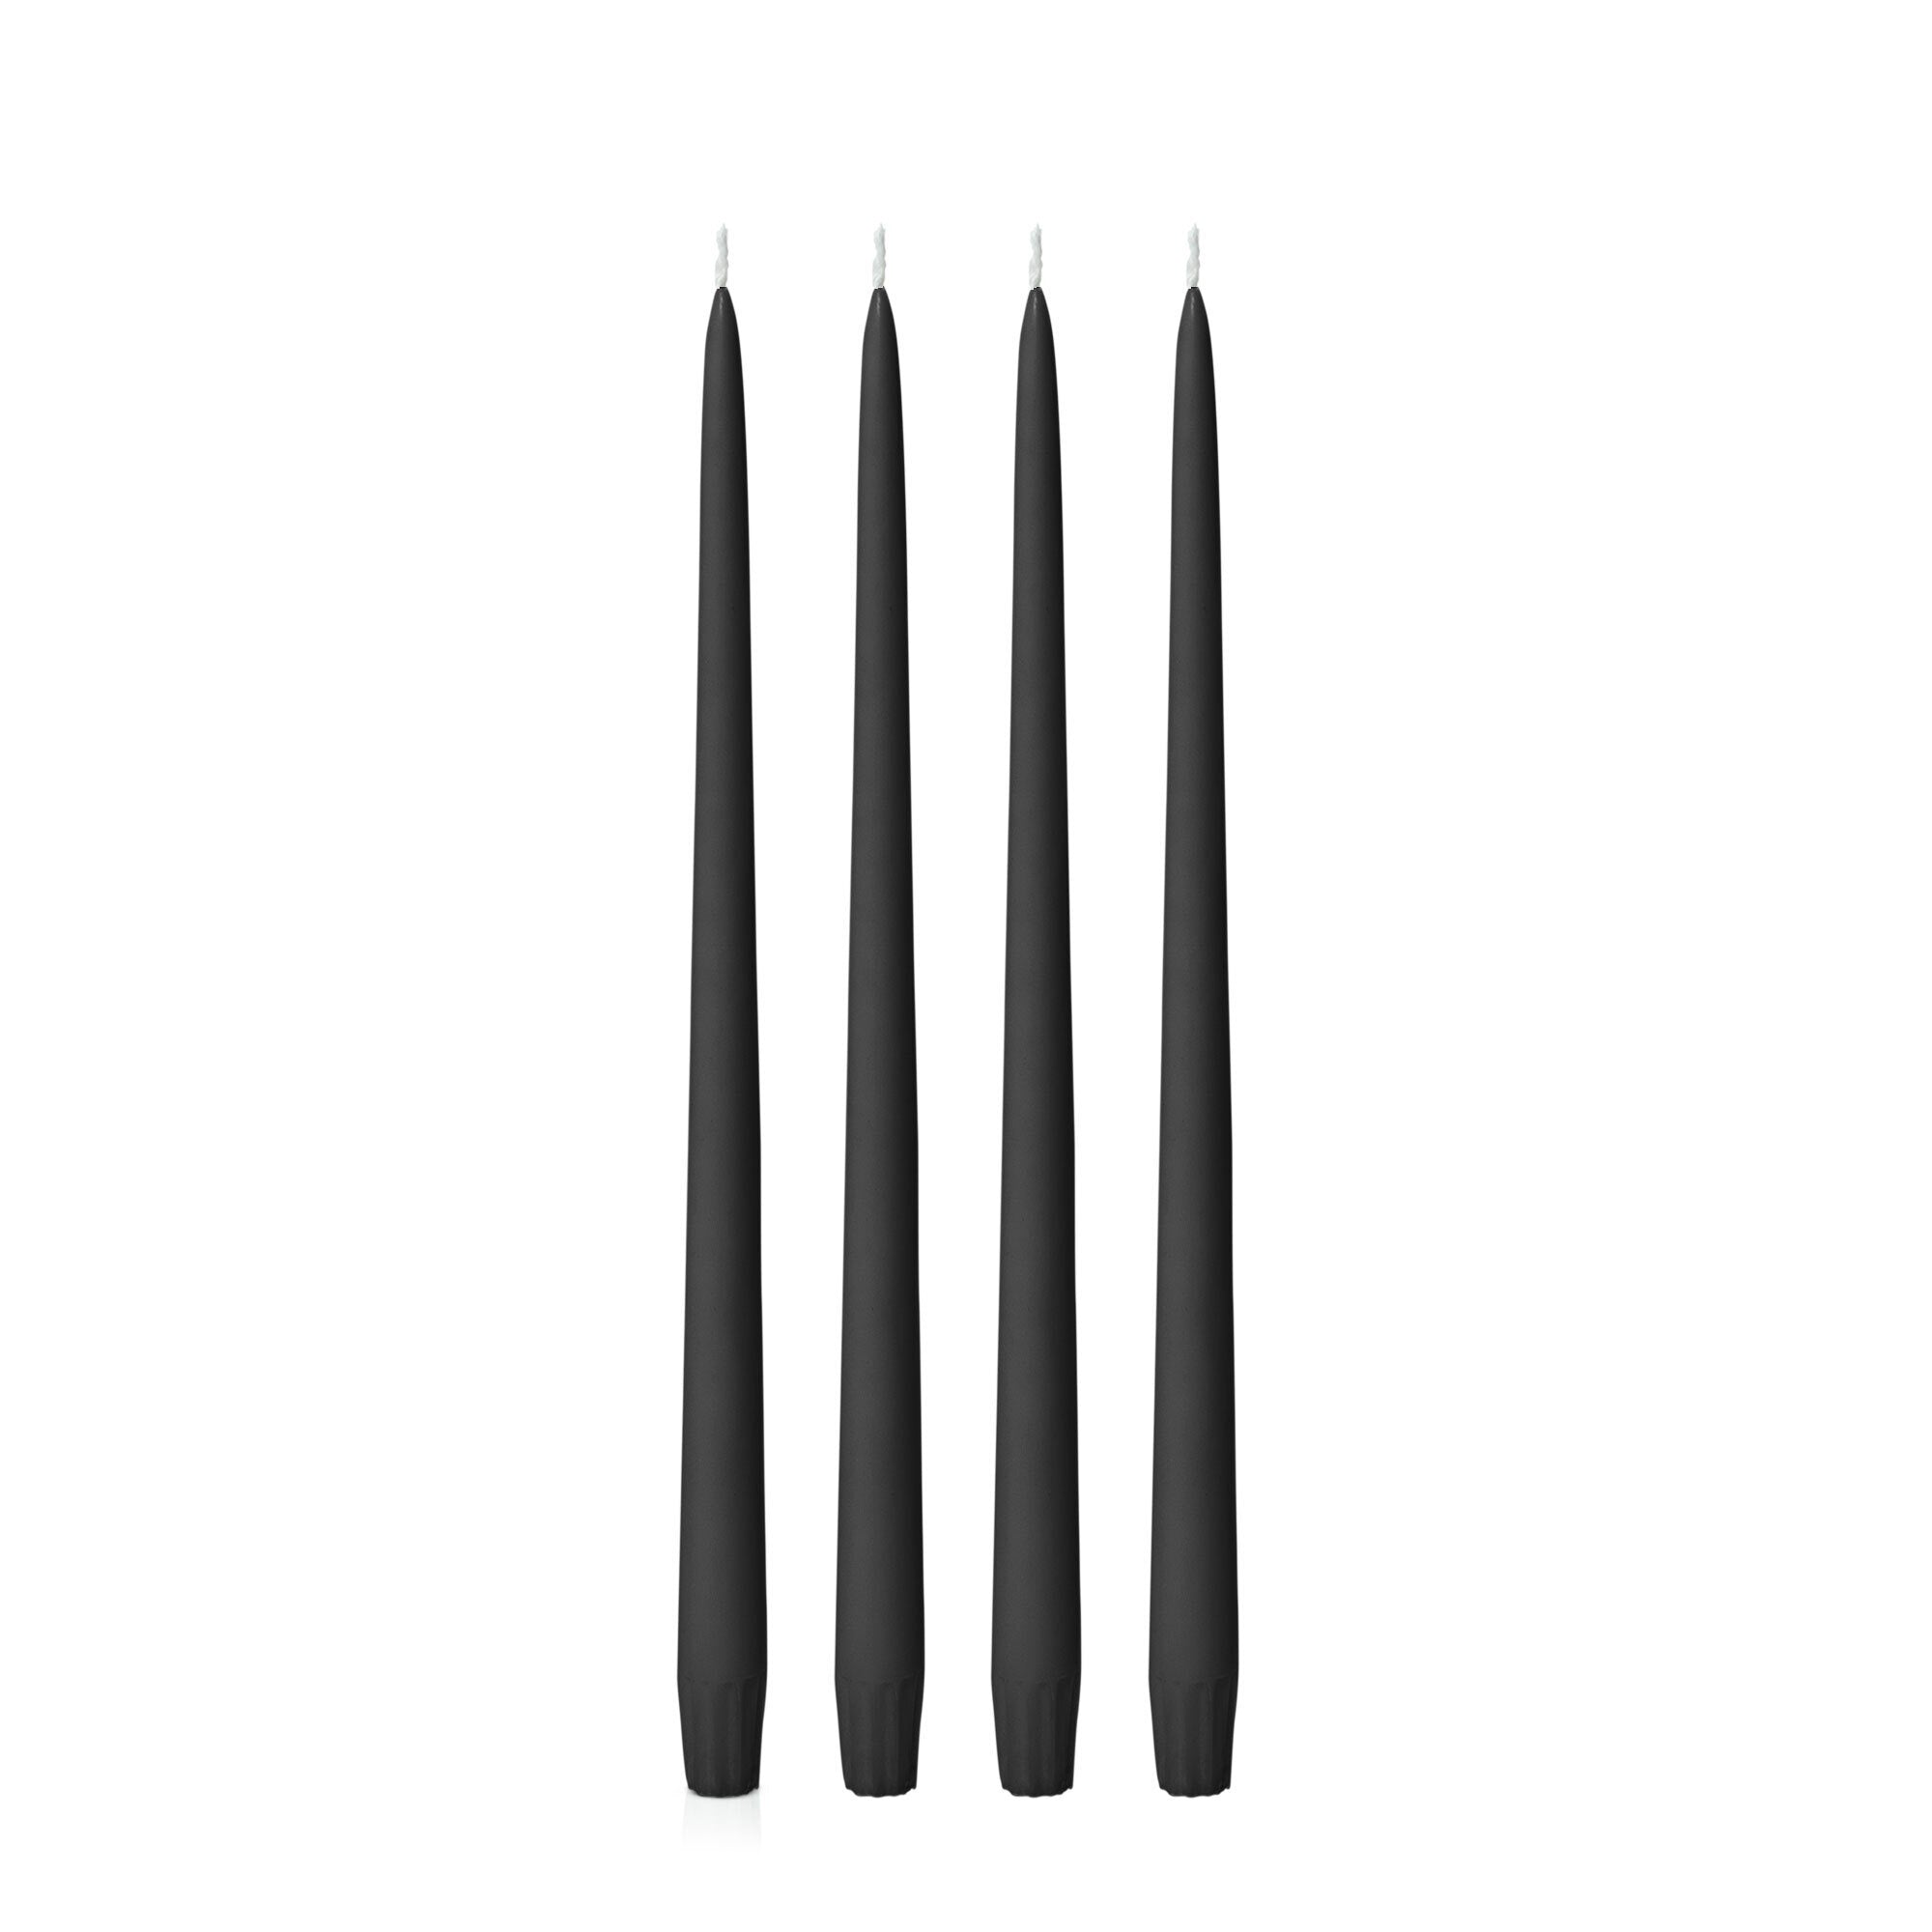 Tapered Candle 35cm, Black, Pack of 4